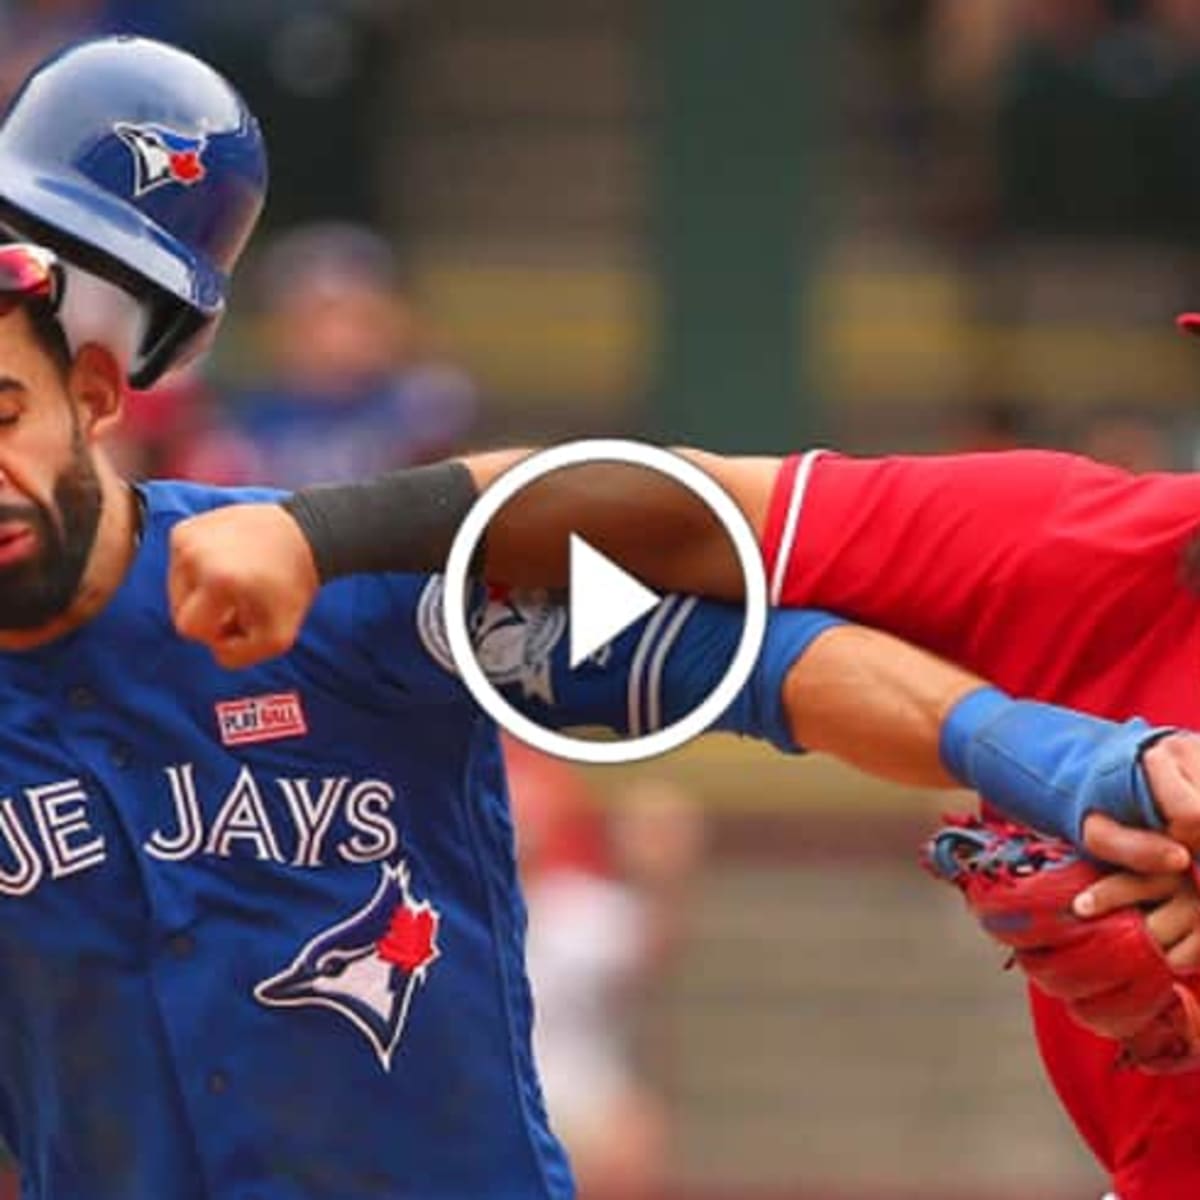 Rougned Odor suspended eight games for punching Jose Bautista